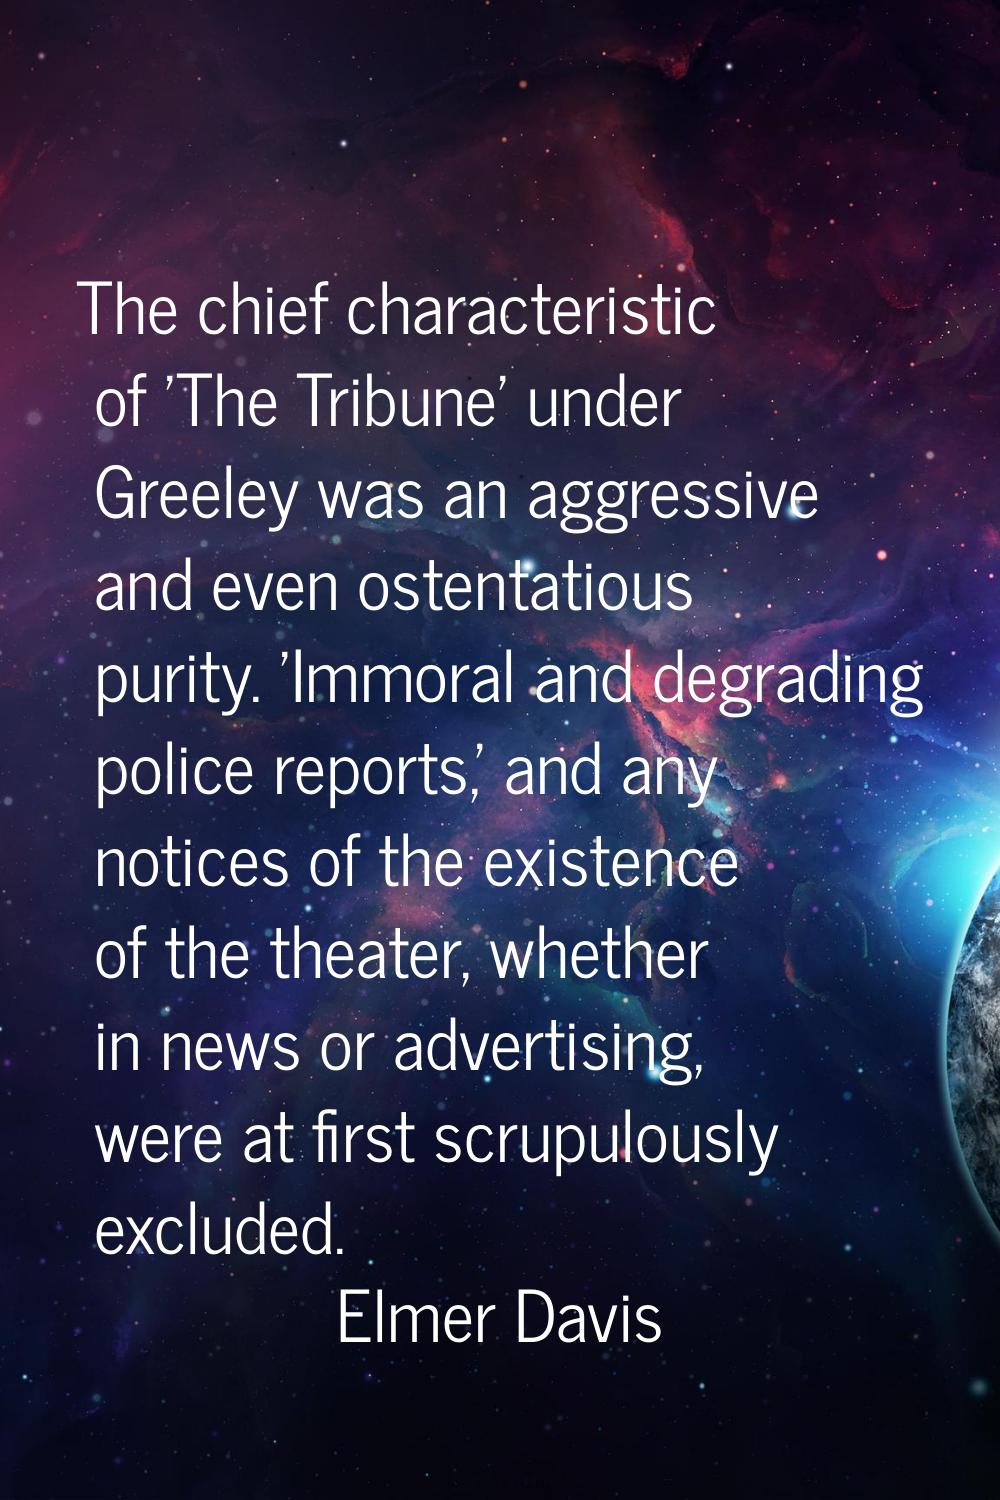 The chief characteristic of 'The Tribune' under Greeley was an aggressive and even ostentatious pur